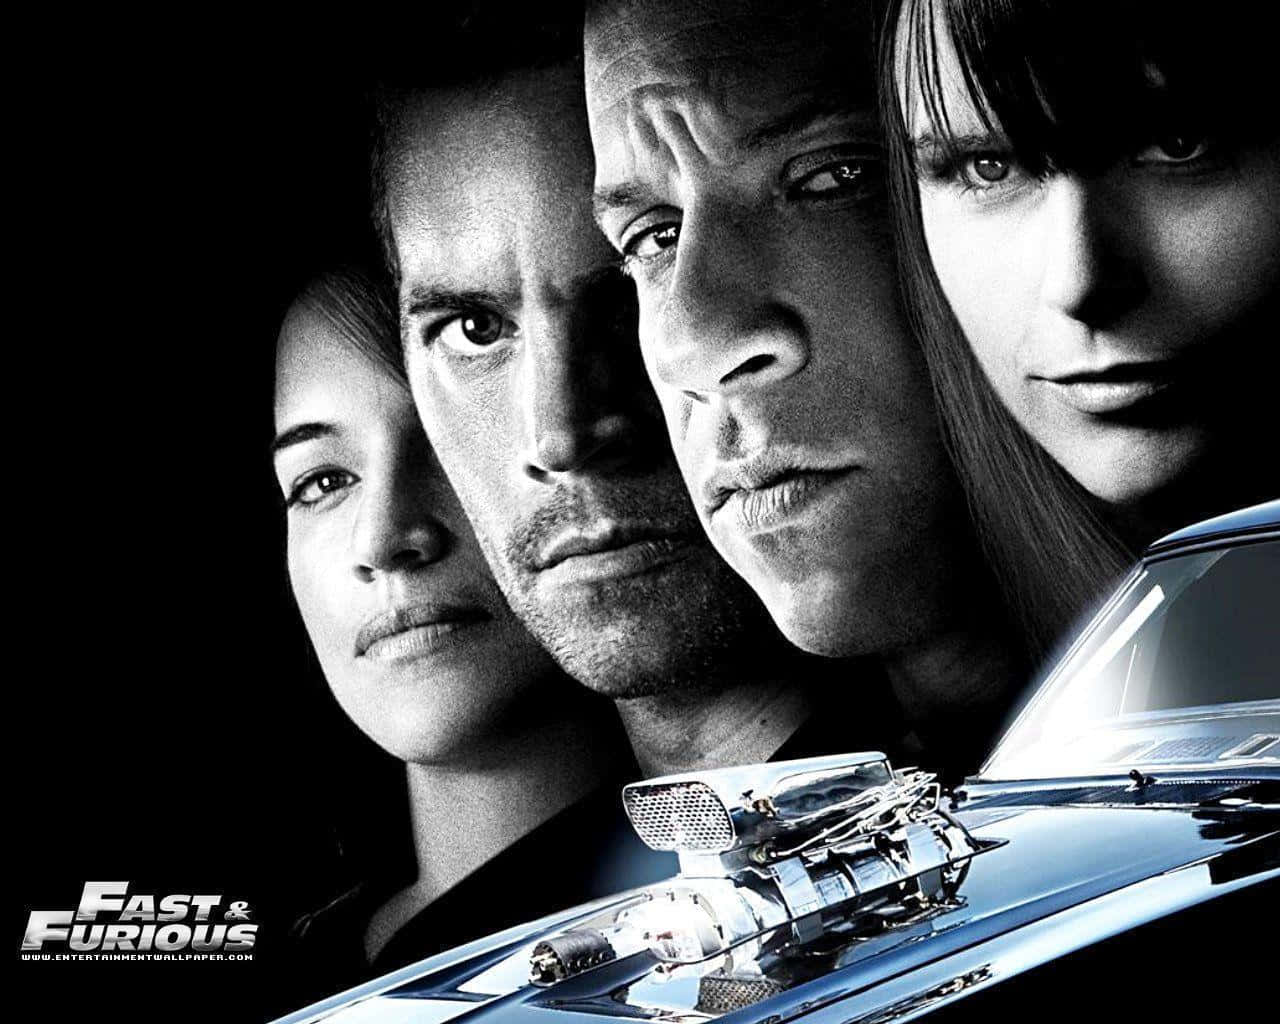 Feel the adrenalin with the Cool Fast And Furious cast Wallpaper